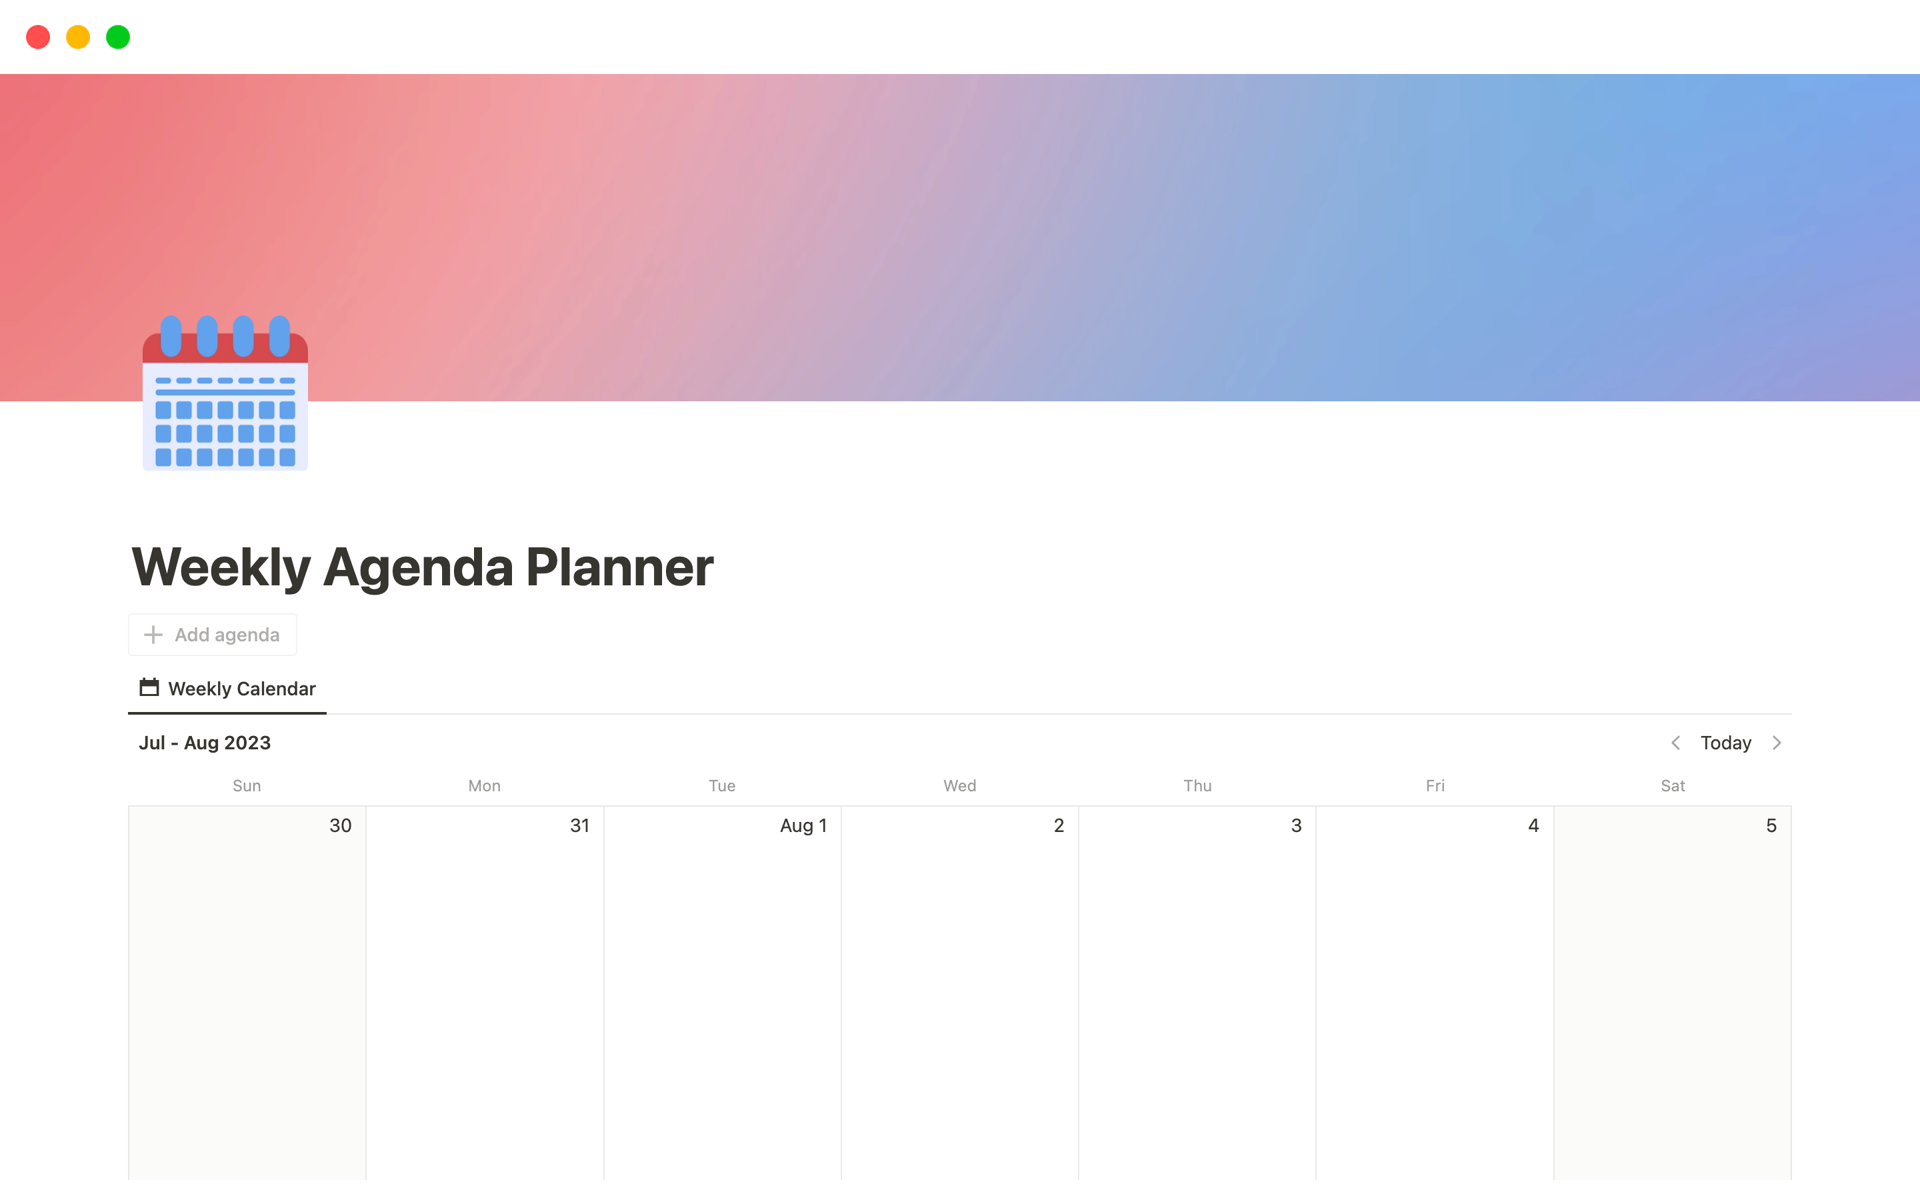 The Weekly Agenda Planner Notion template is a simple tool that helps you plan your week.